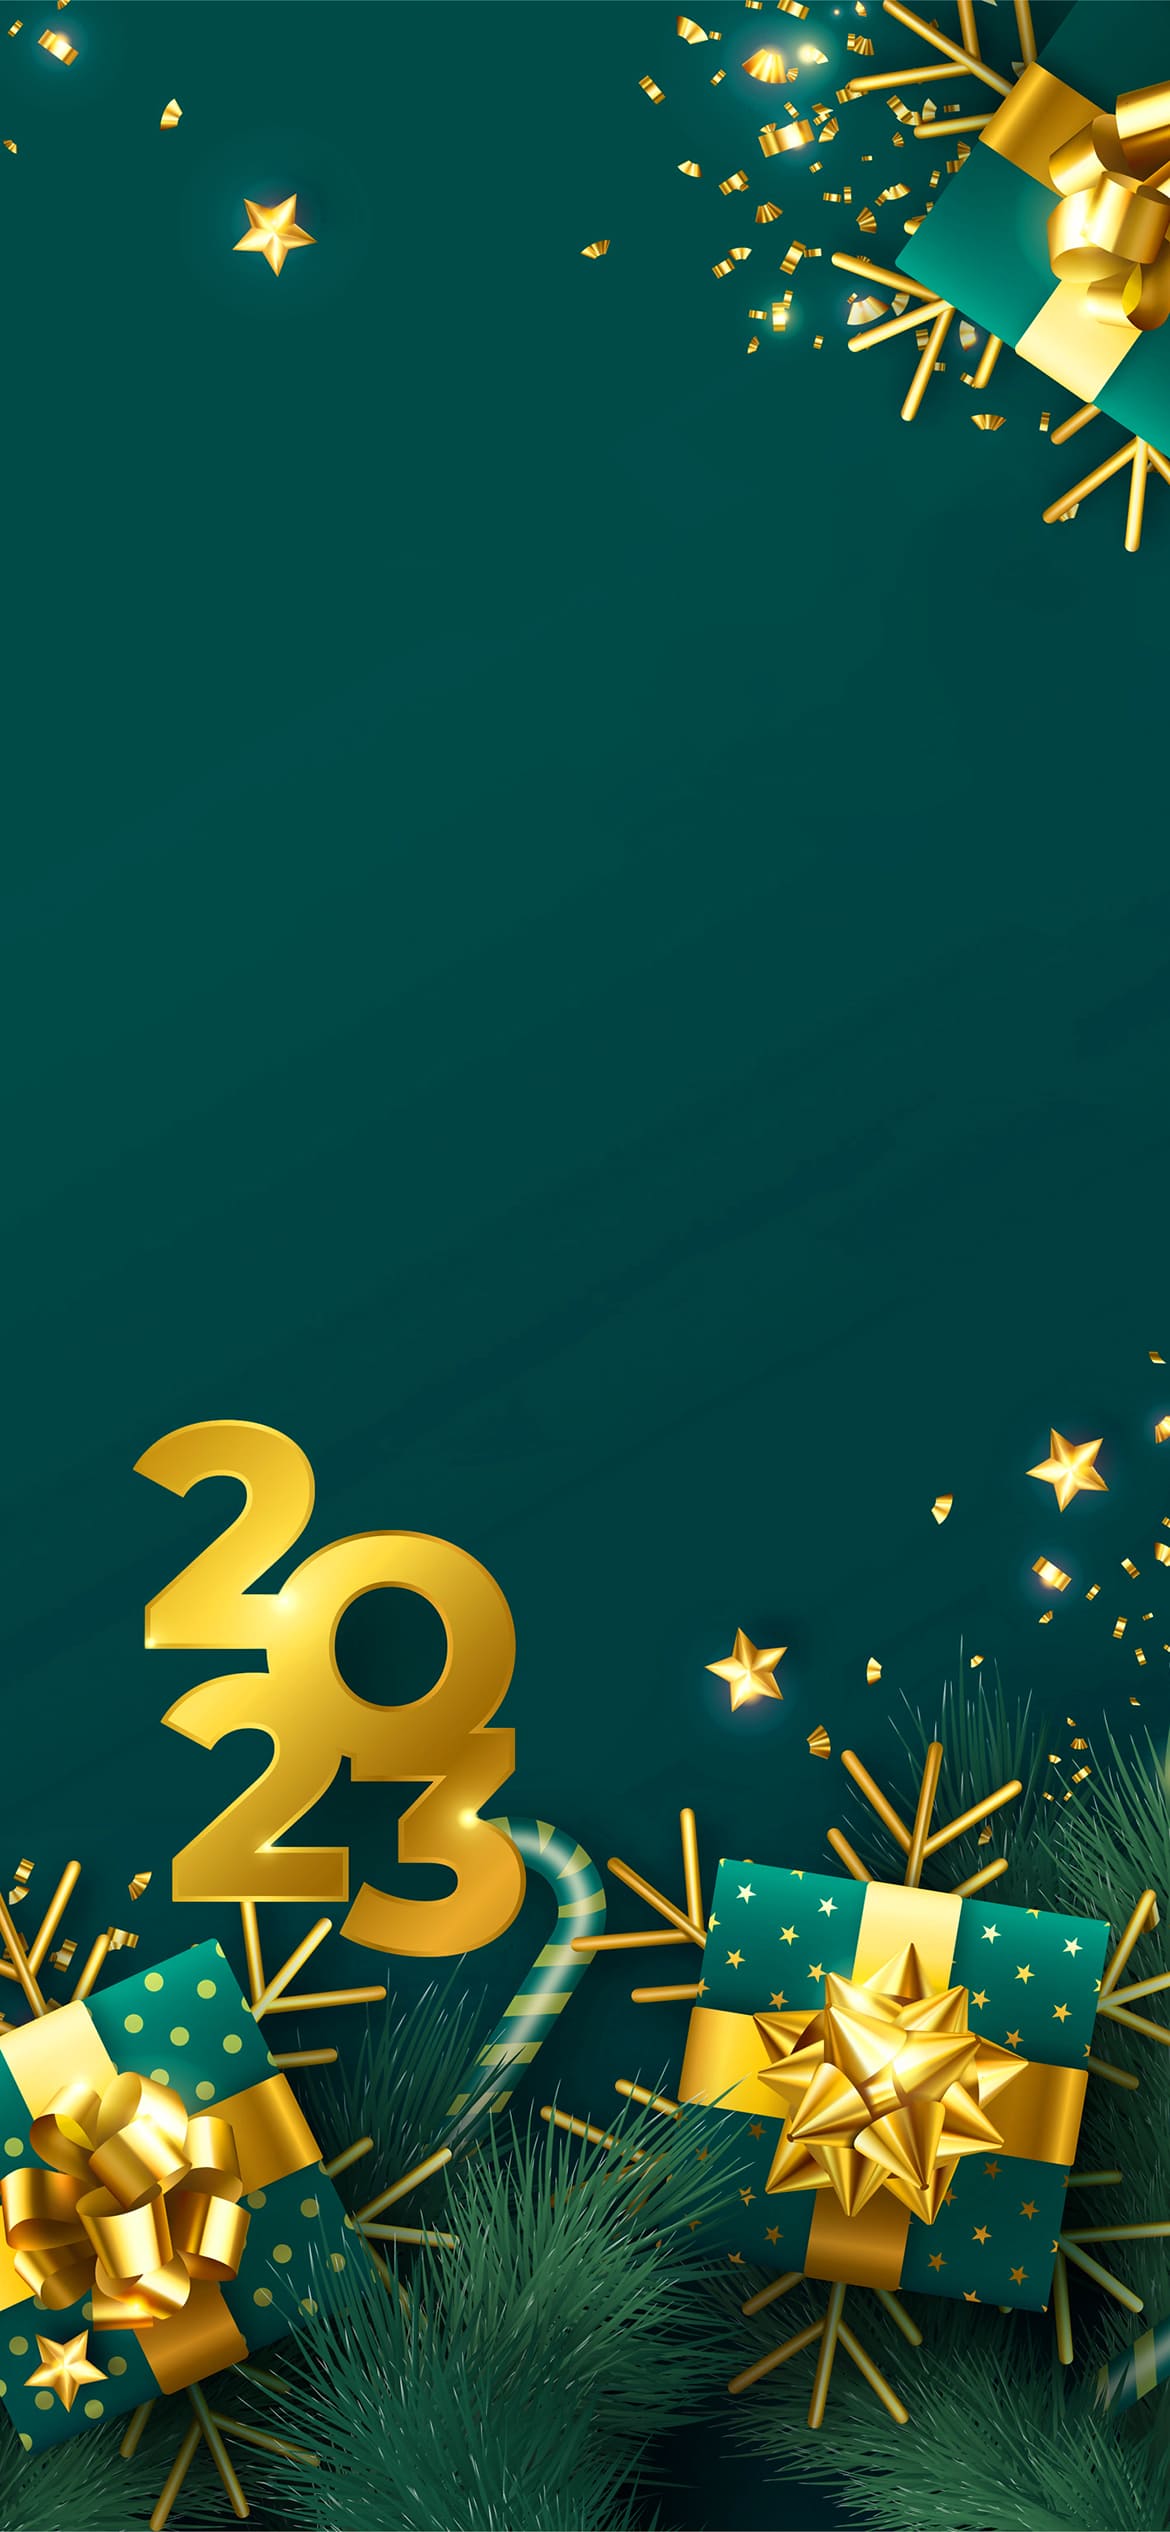 New Year 2023 Christmas Background Gold Blue Party Celebration Stock Photo   Download Image Now  iStock